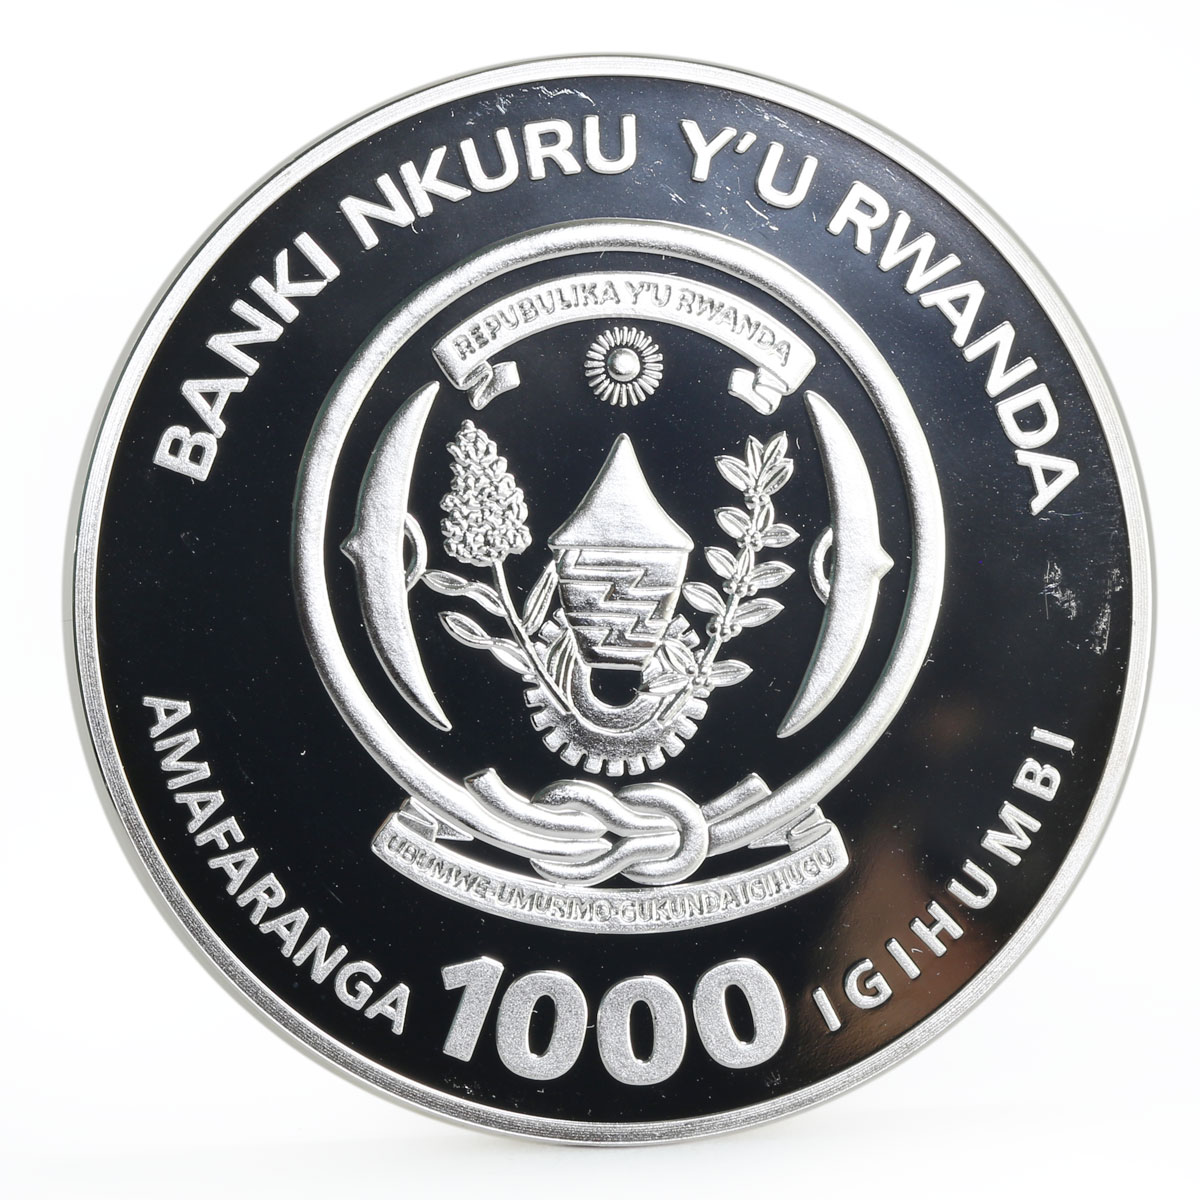 Rwanda 1000 francs Year of the Tiger gilded silver coin 2010